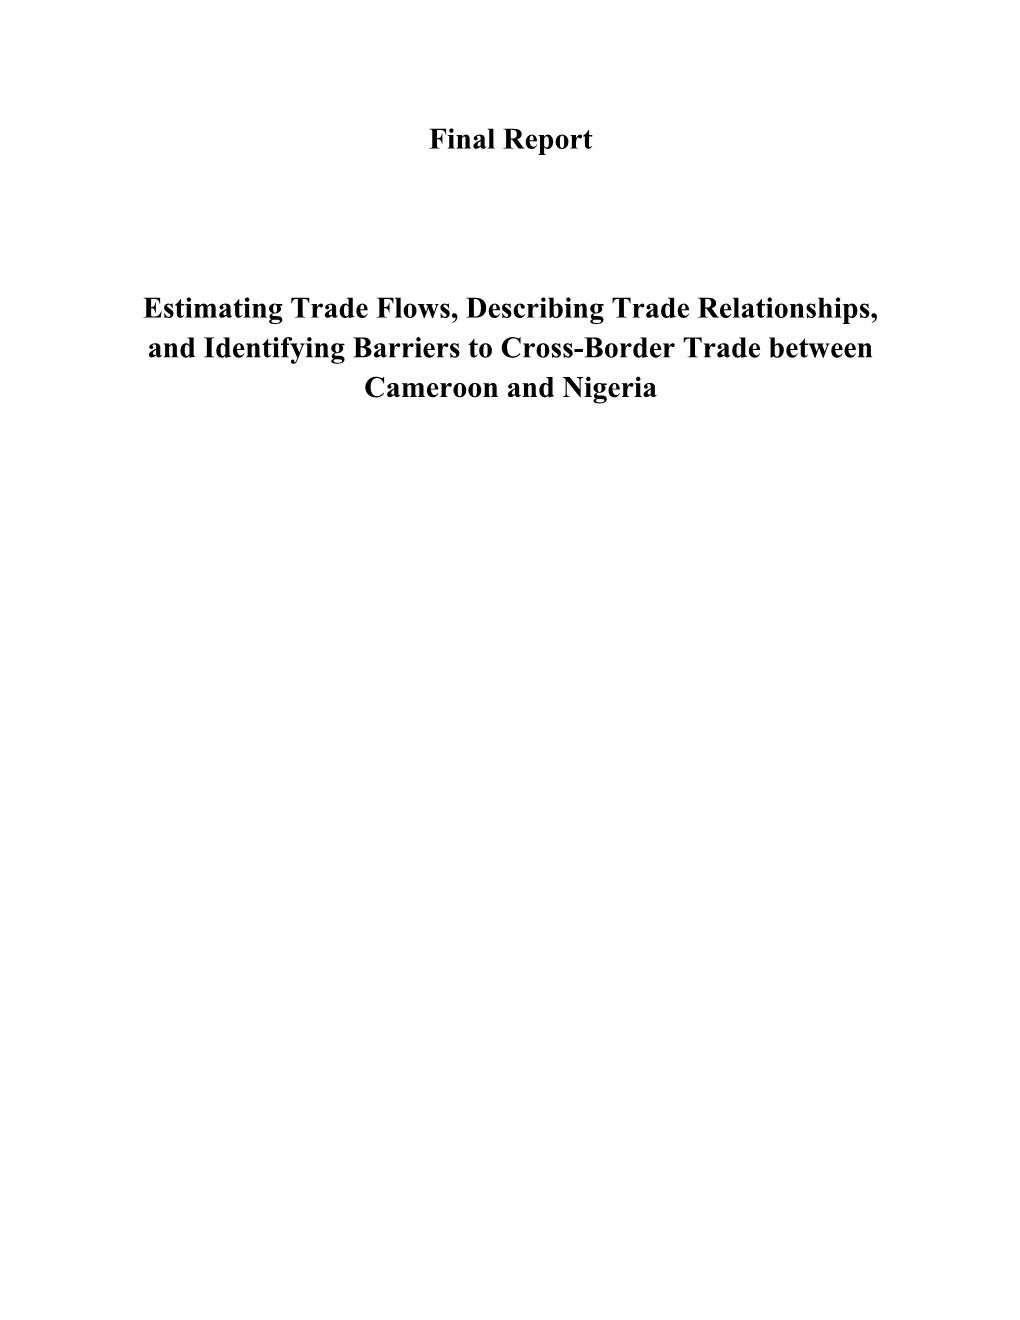 Estimating Trade Flows, Describing Trade Relationships, and Identifying Barriers To